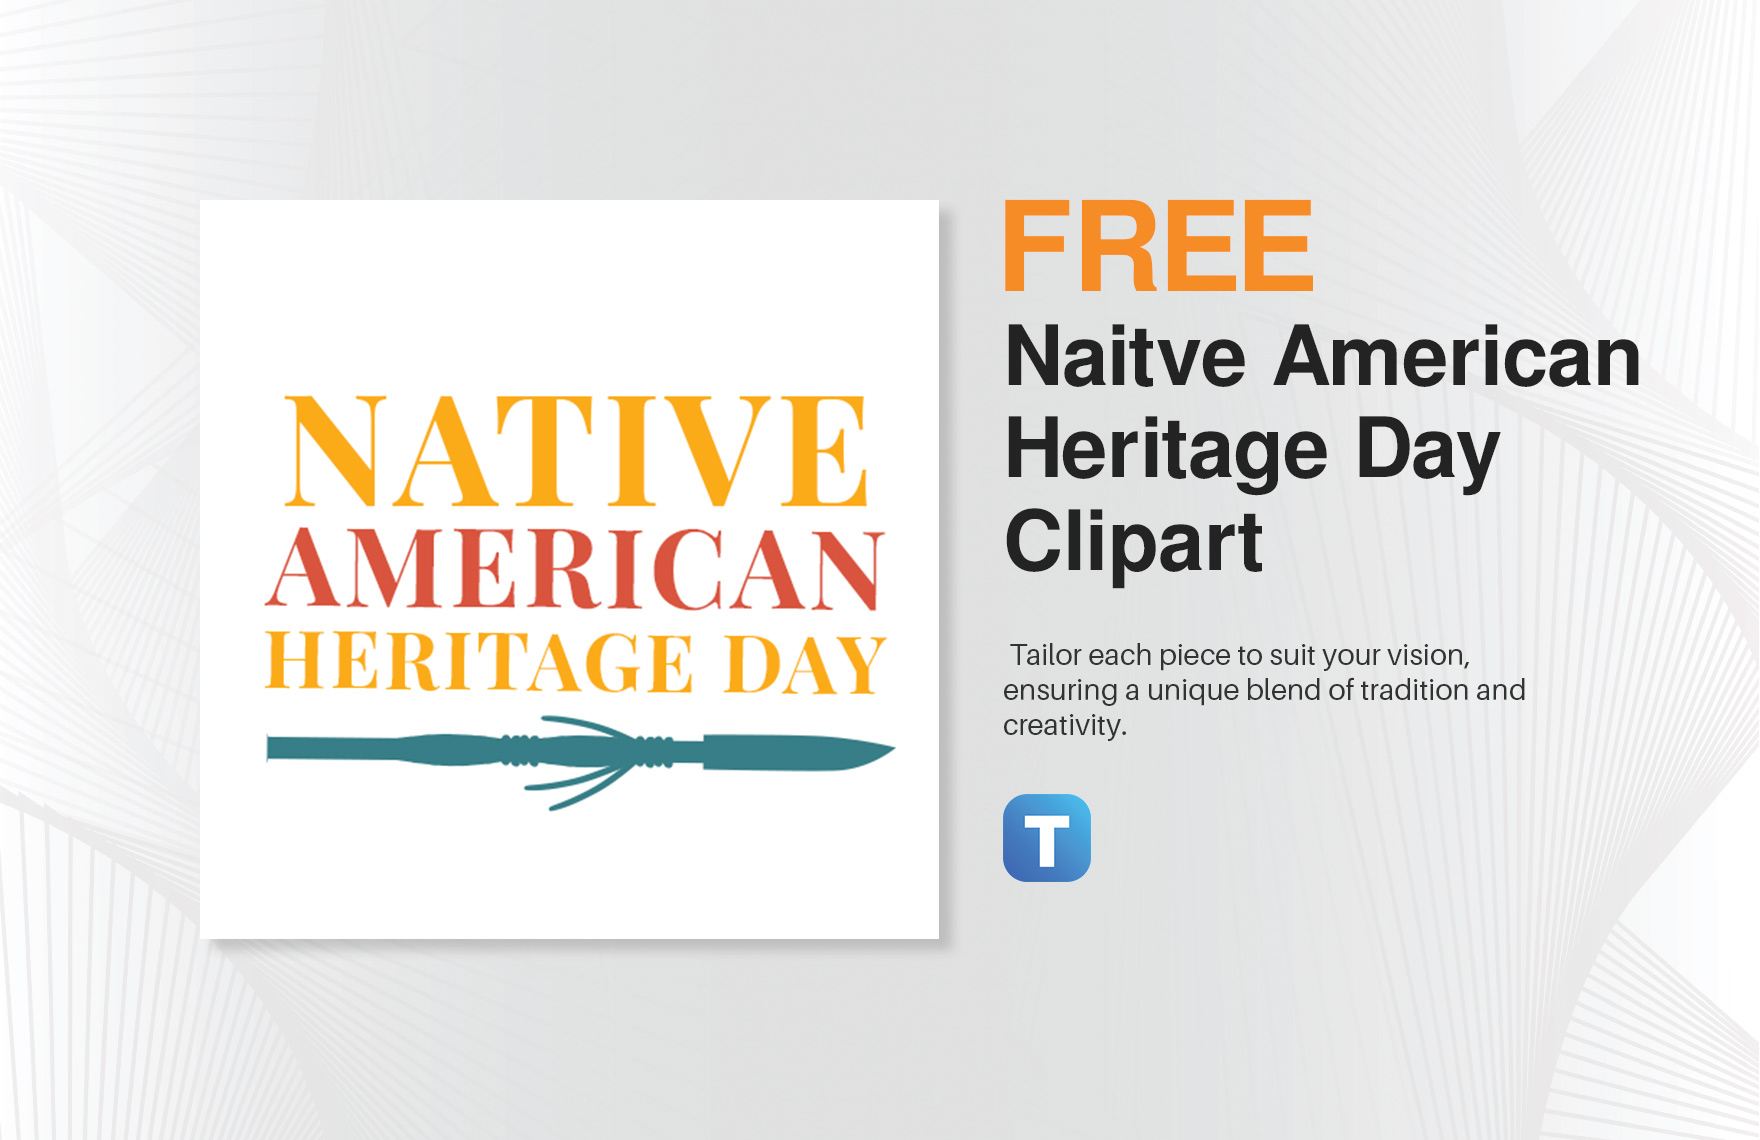 Naitve American Heritage Day Clipart Template